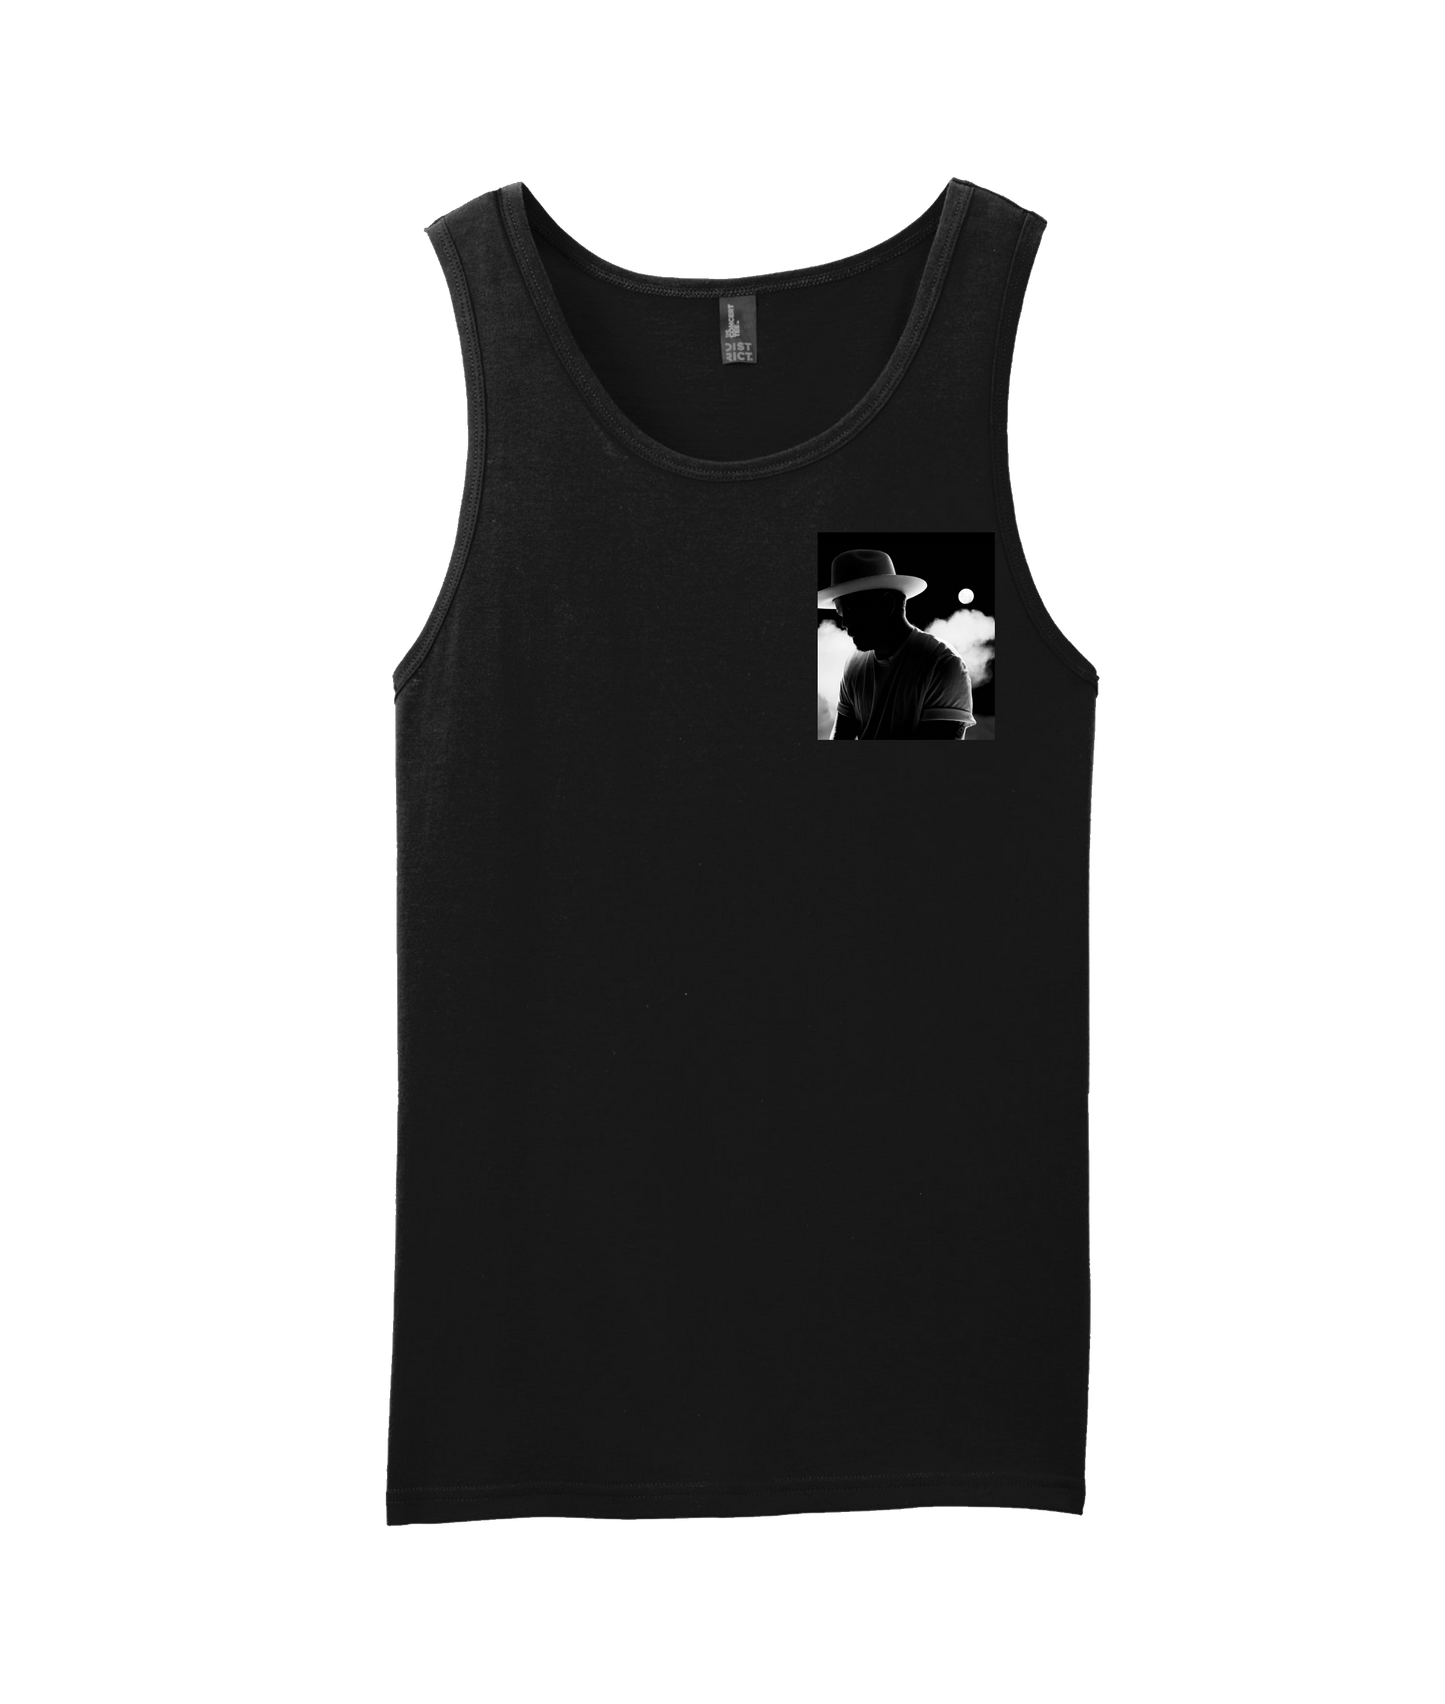 Andy Crosby Music - Holy Vices - Black Tank Top